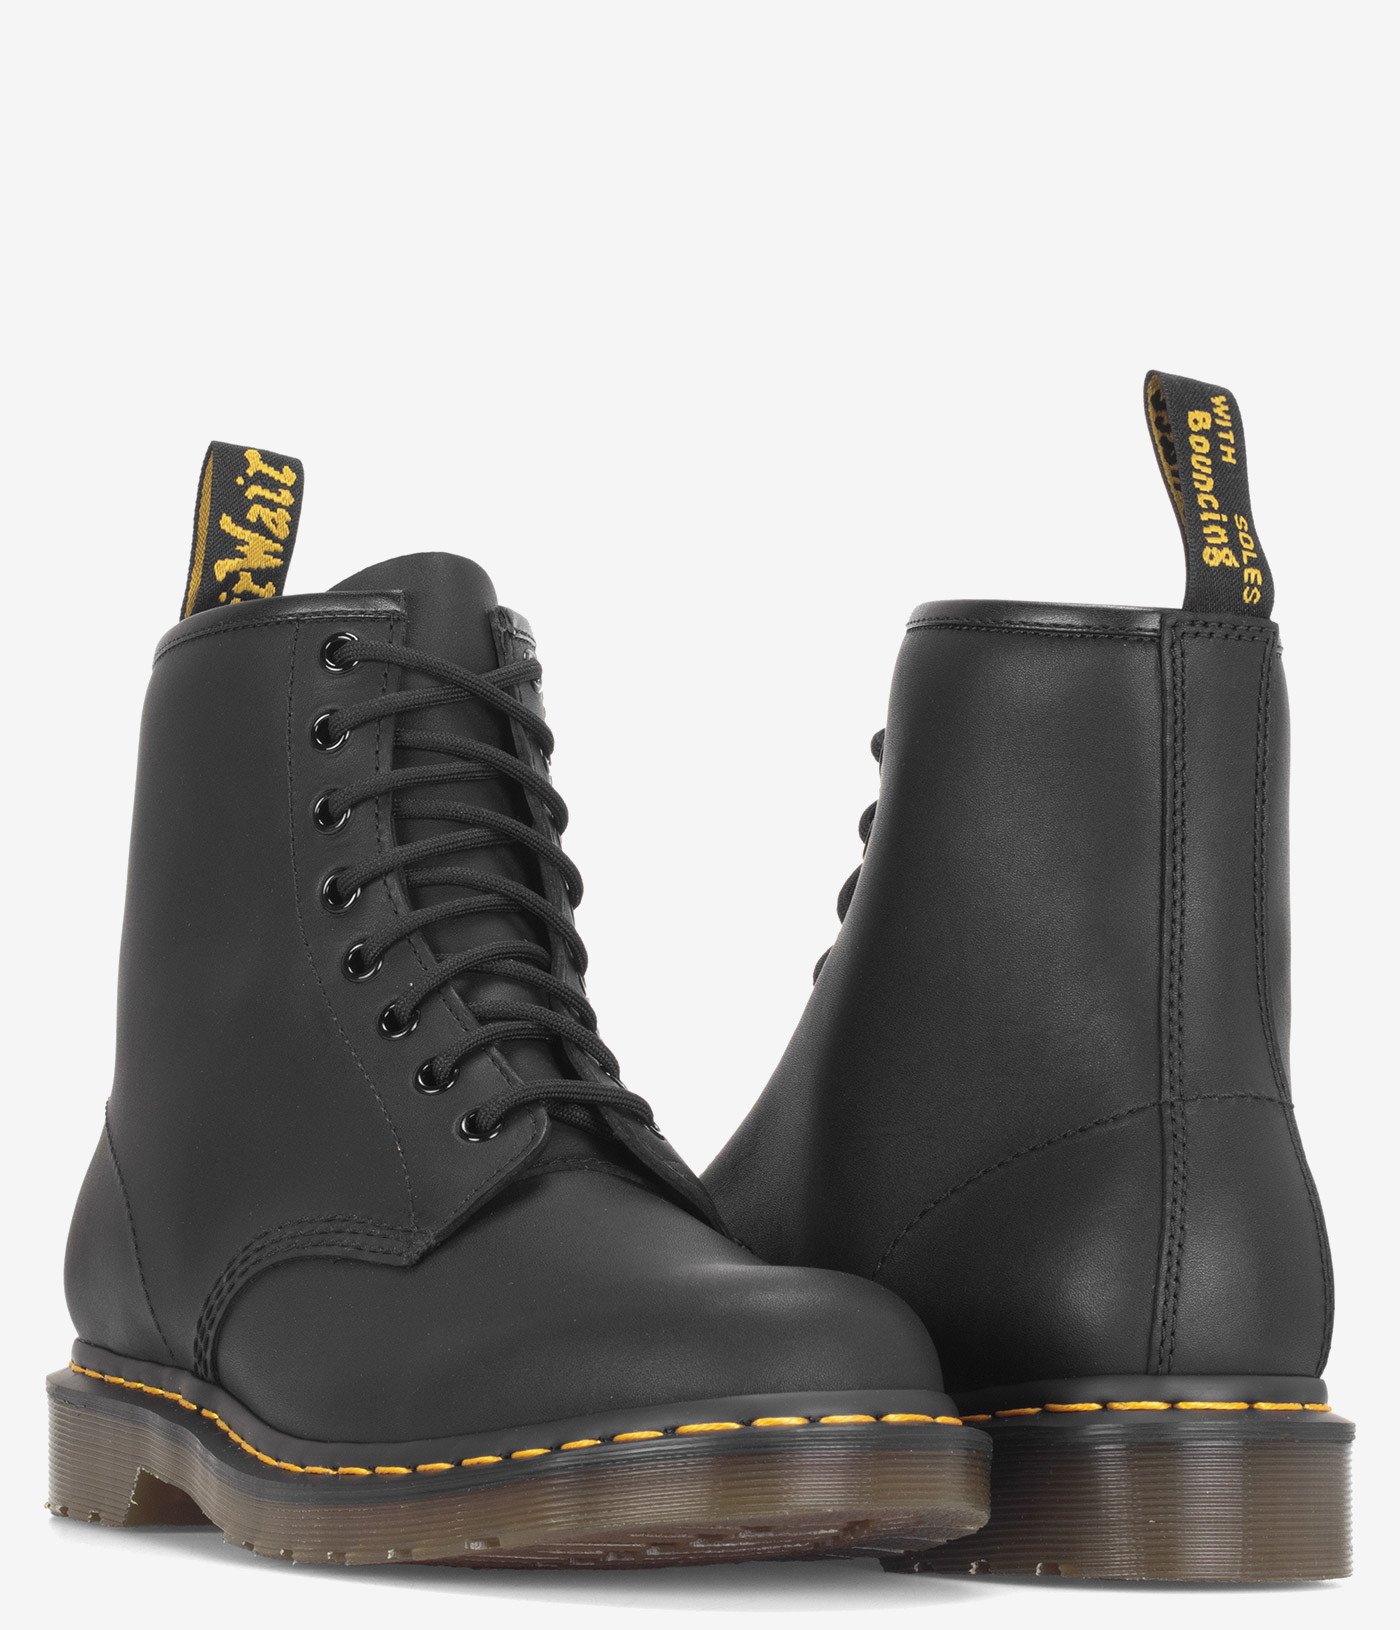 Dr. Martens 1460 Greasy 8-Eye Boot 